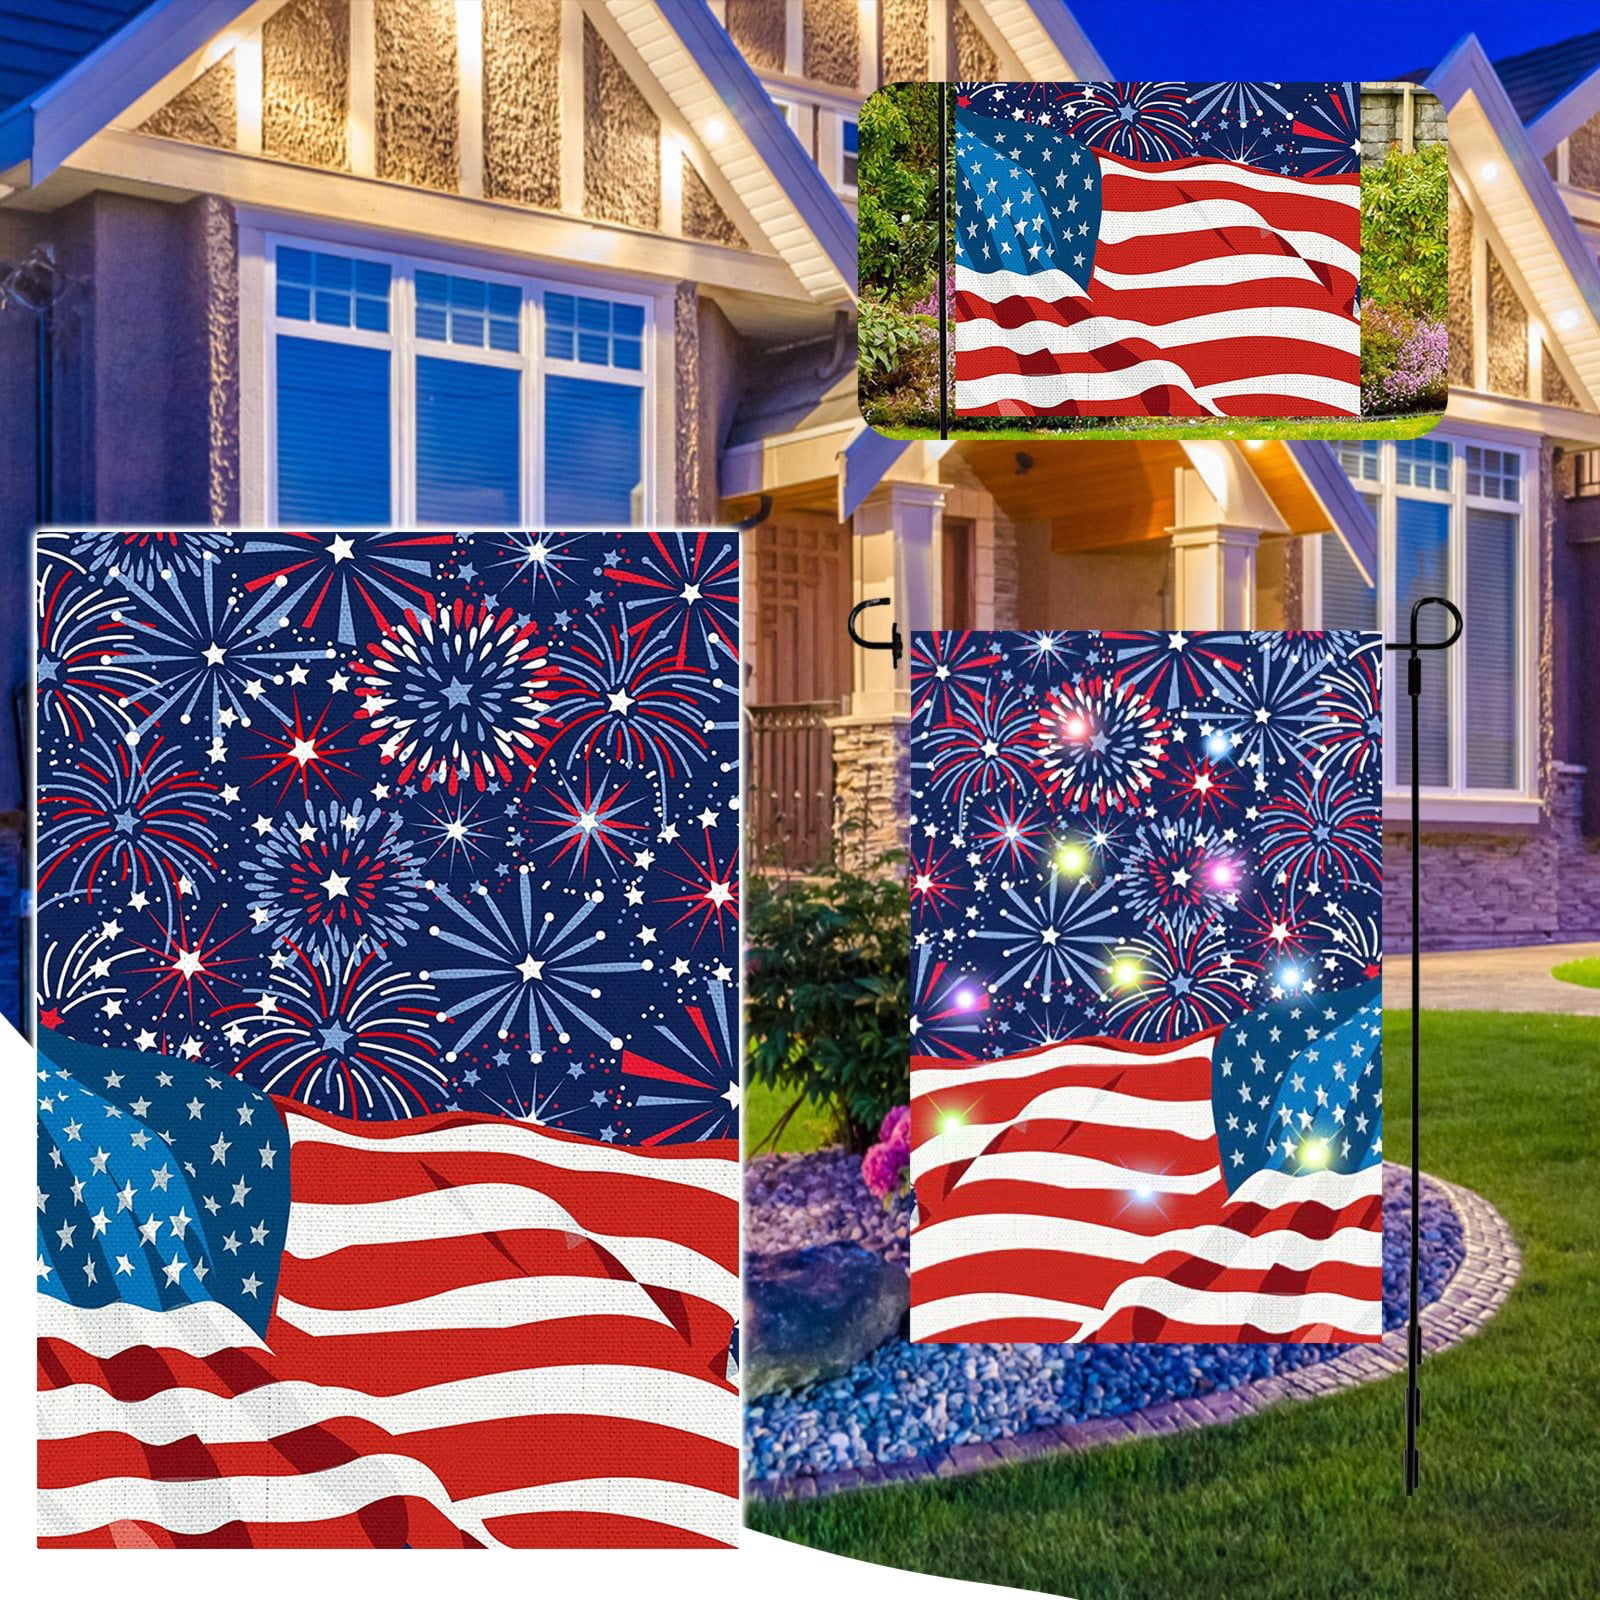 Black Cat Fireworks 3x5 ft Polyester Flag 4th of July Independence Day sold here 